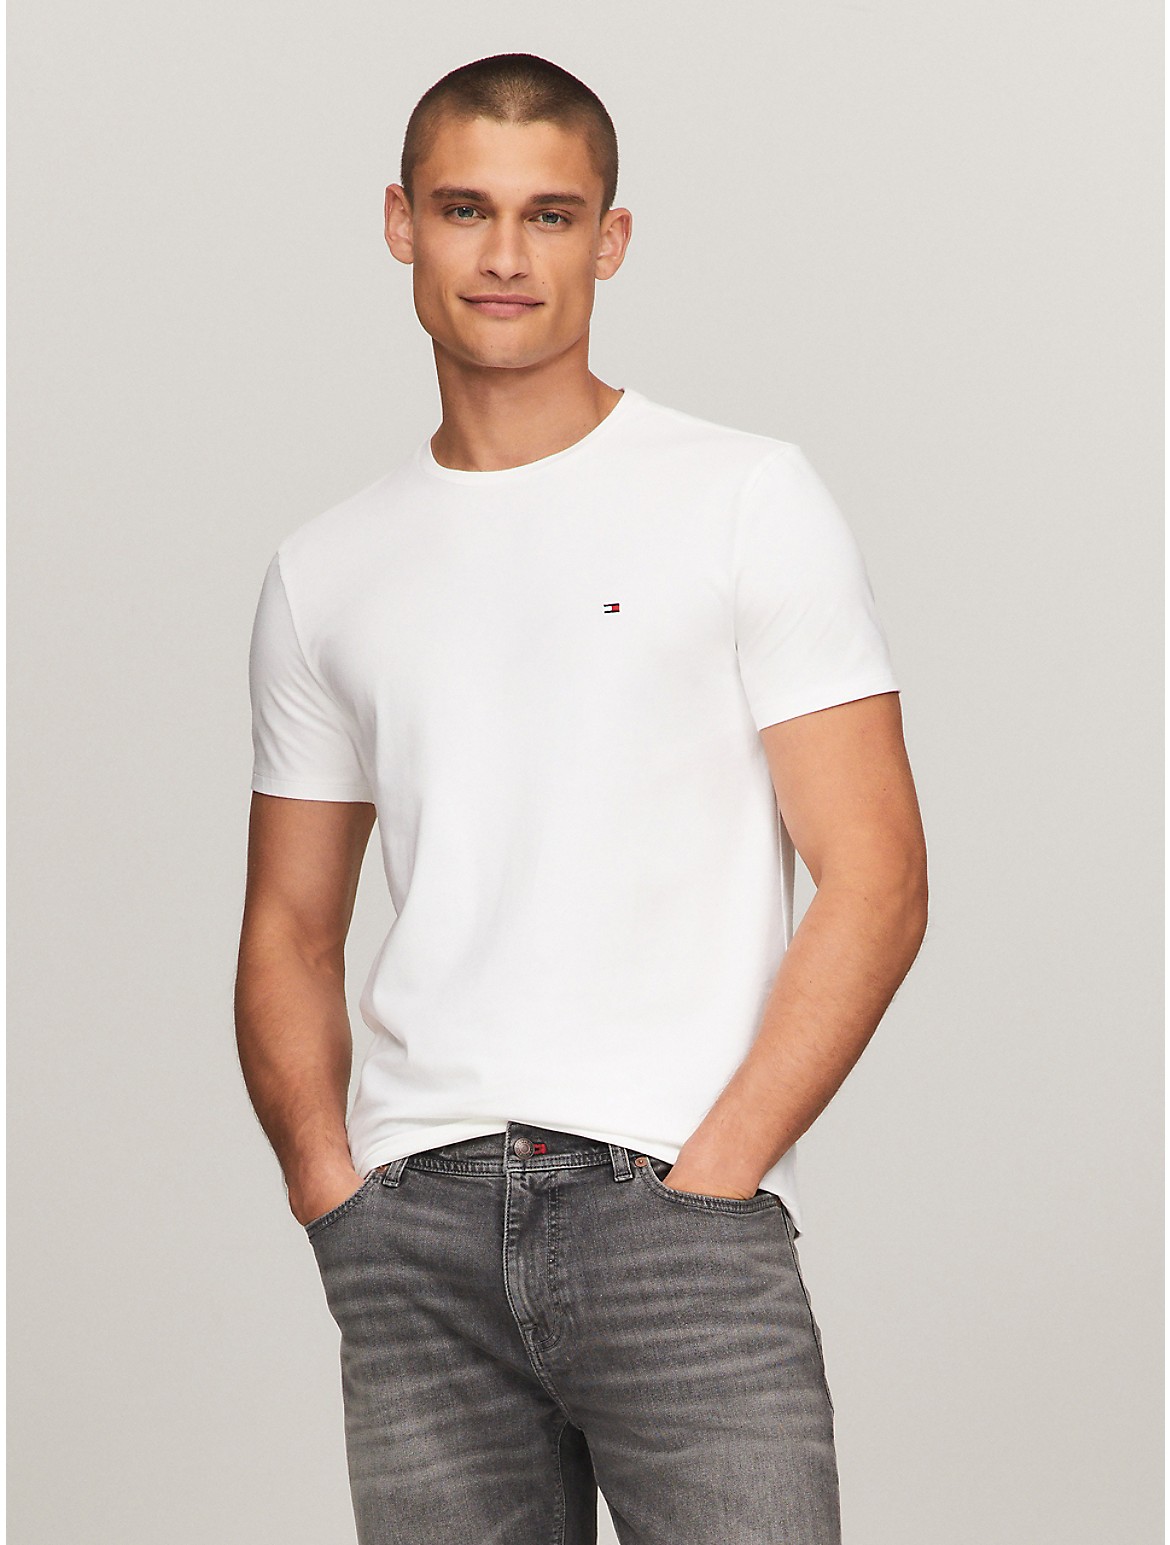 Tommy Hilfiger Men's Everyday Solid T-Shirt - White - L